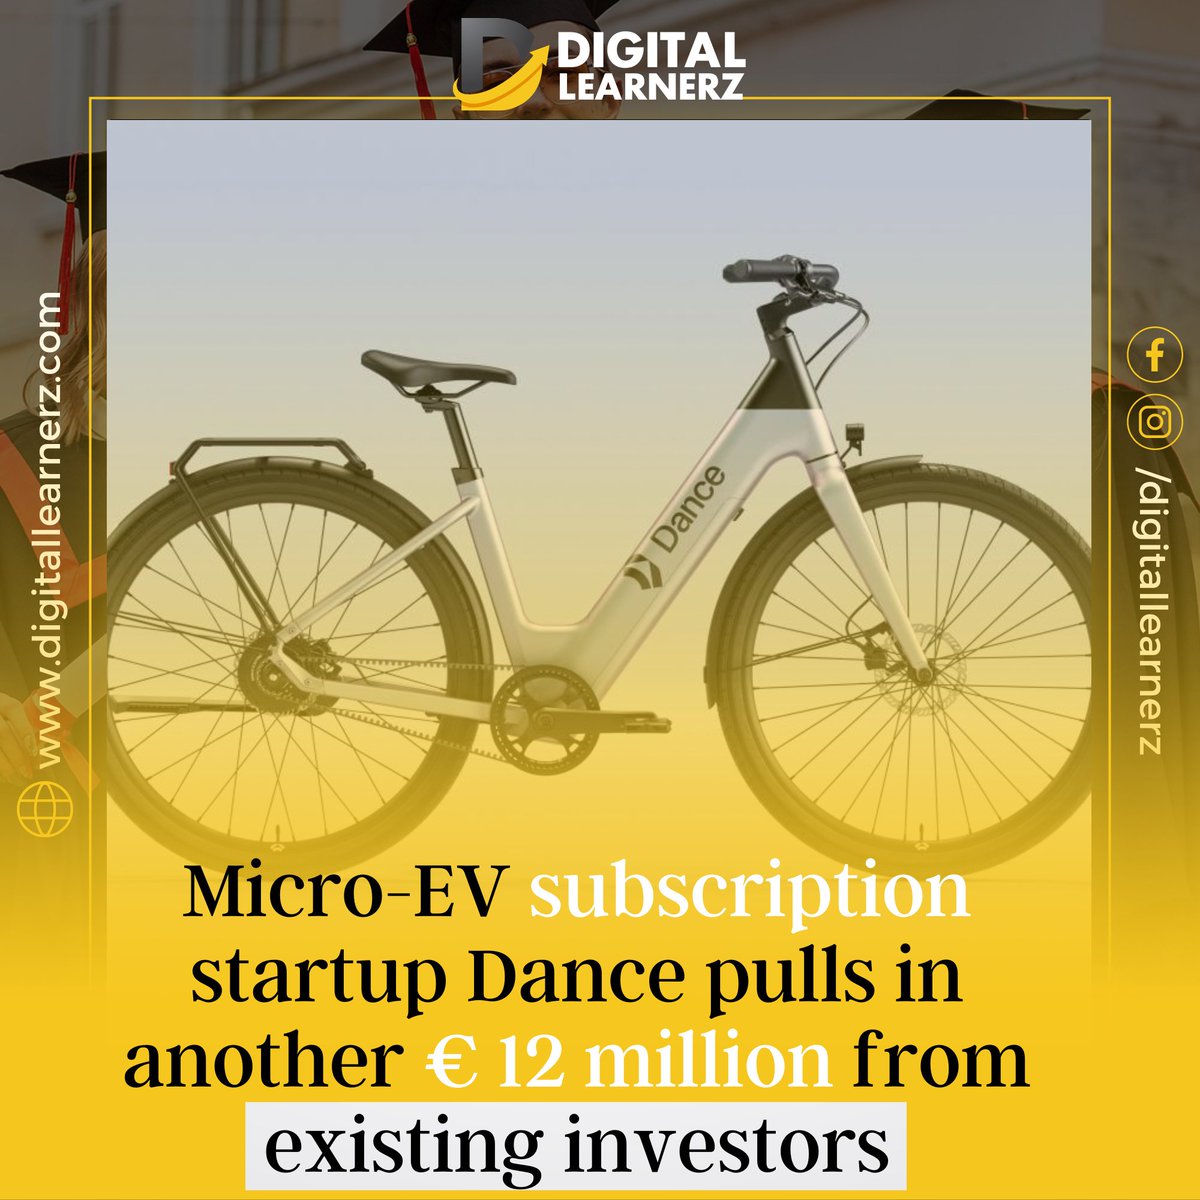 Micro-EV subscription startup Dance pulls in another € 12 million from existing investors

#microev #subscription #startup #million #investors #existing #digitallearner #digitallearnerz #digitallearner